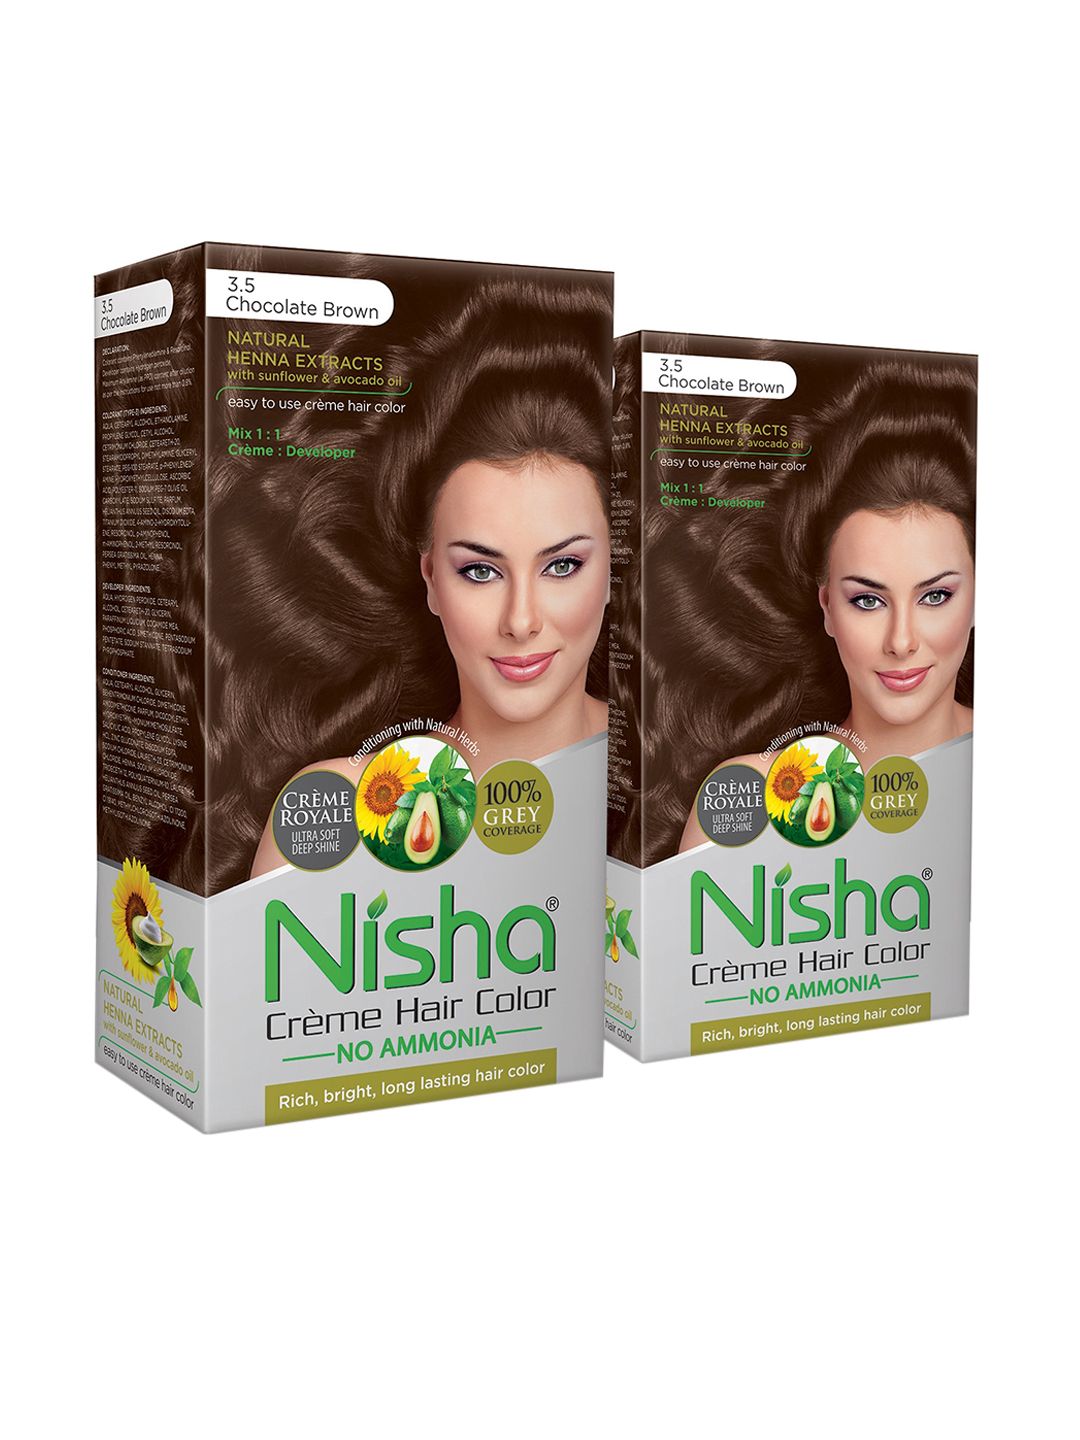 Nisha Unisex Brown Pack of 2 Creme Hair Color 120gm each- Chocolate Brown Price in India